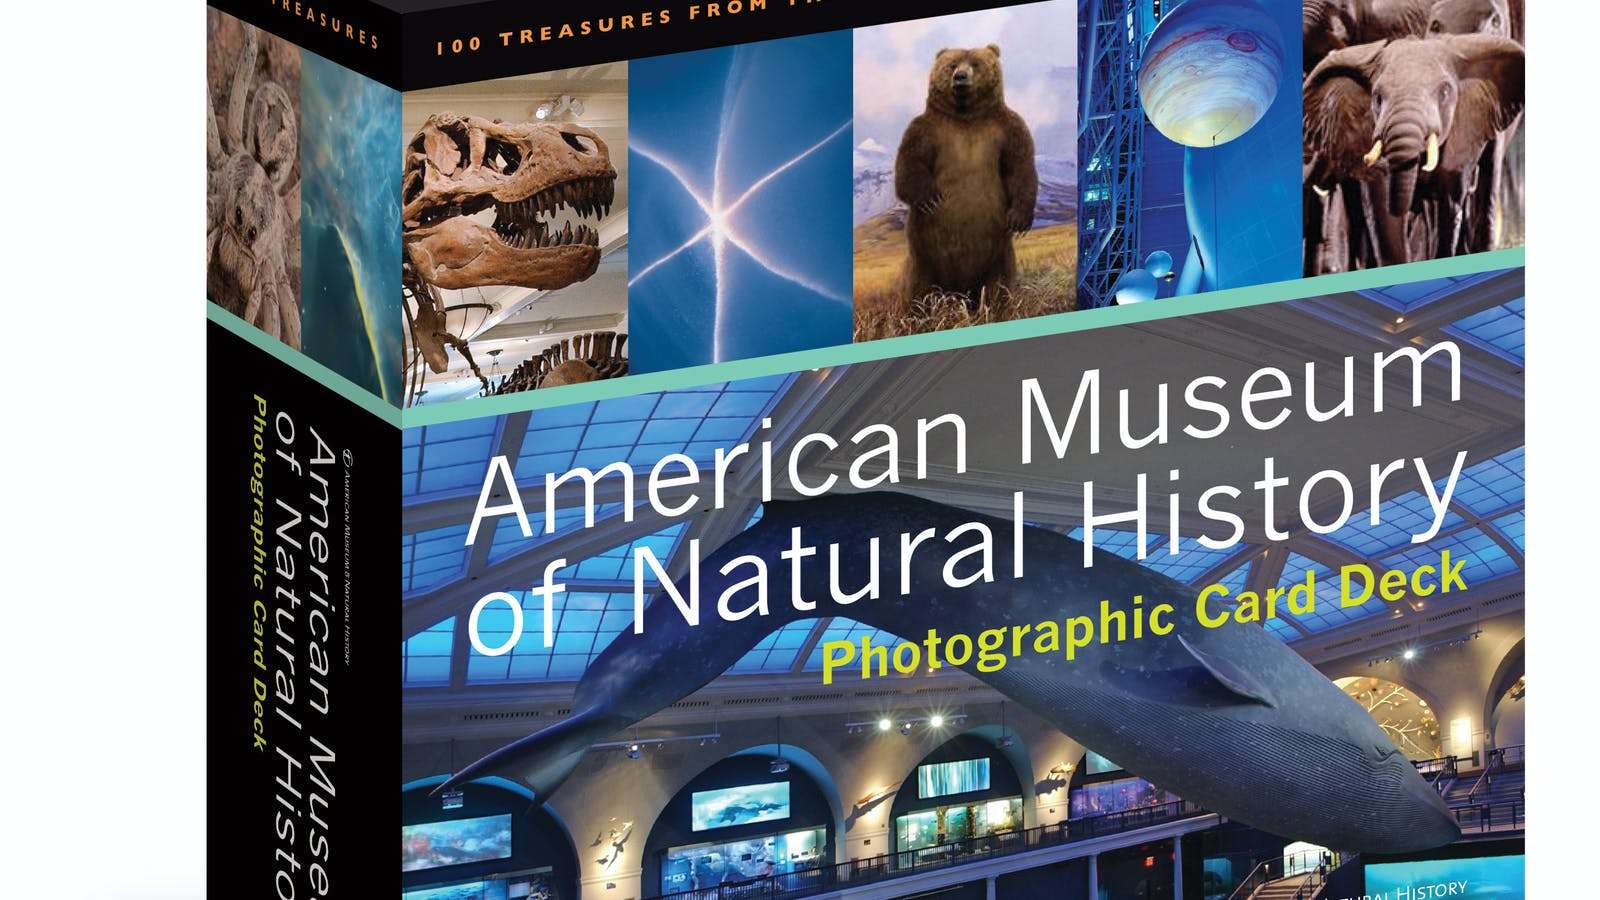 American Museum Of Natural History Card Deck: 100 Treasures from the ...